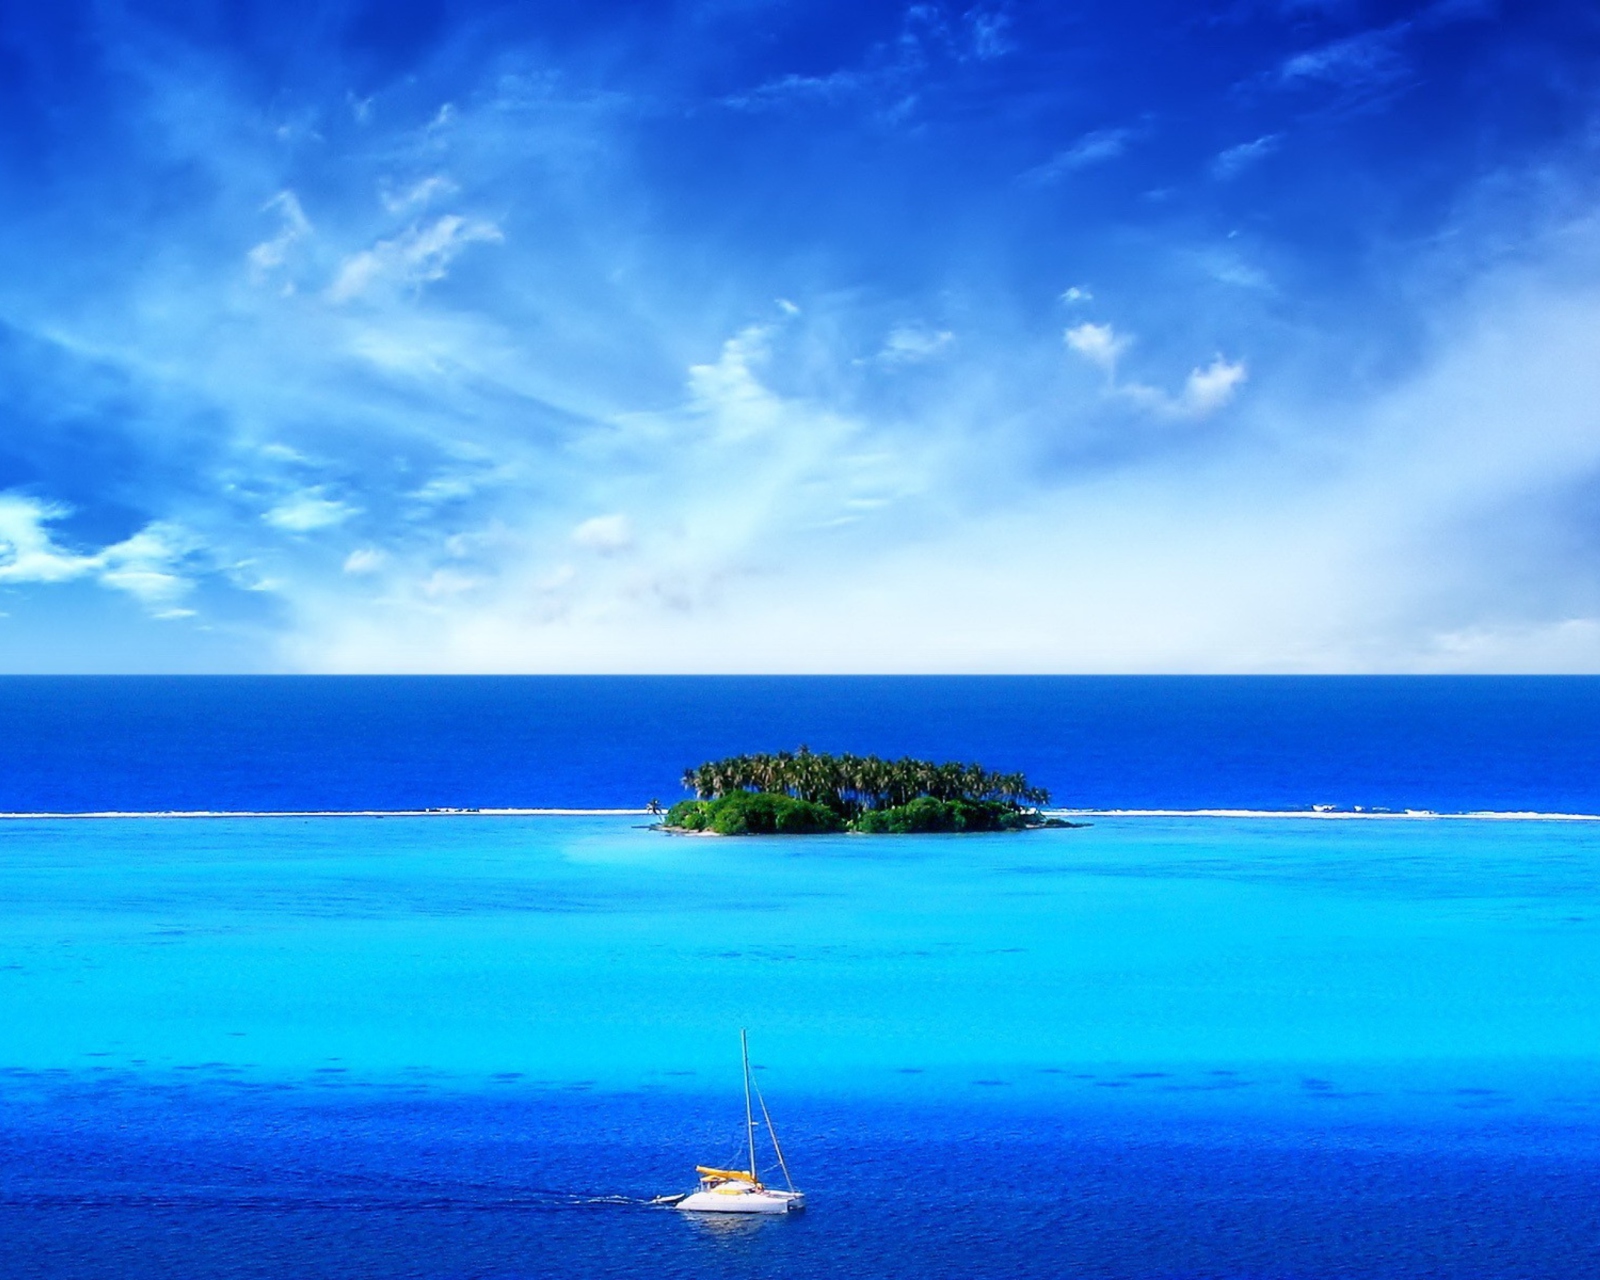 Green Island In Middle Of Blue Ocean And White Boat screenshot #1 1600x1280